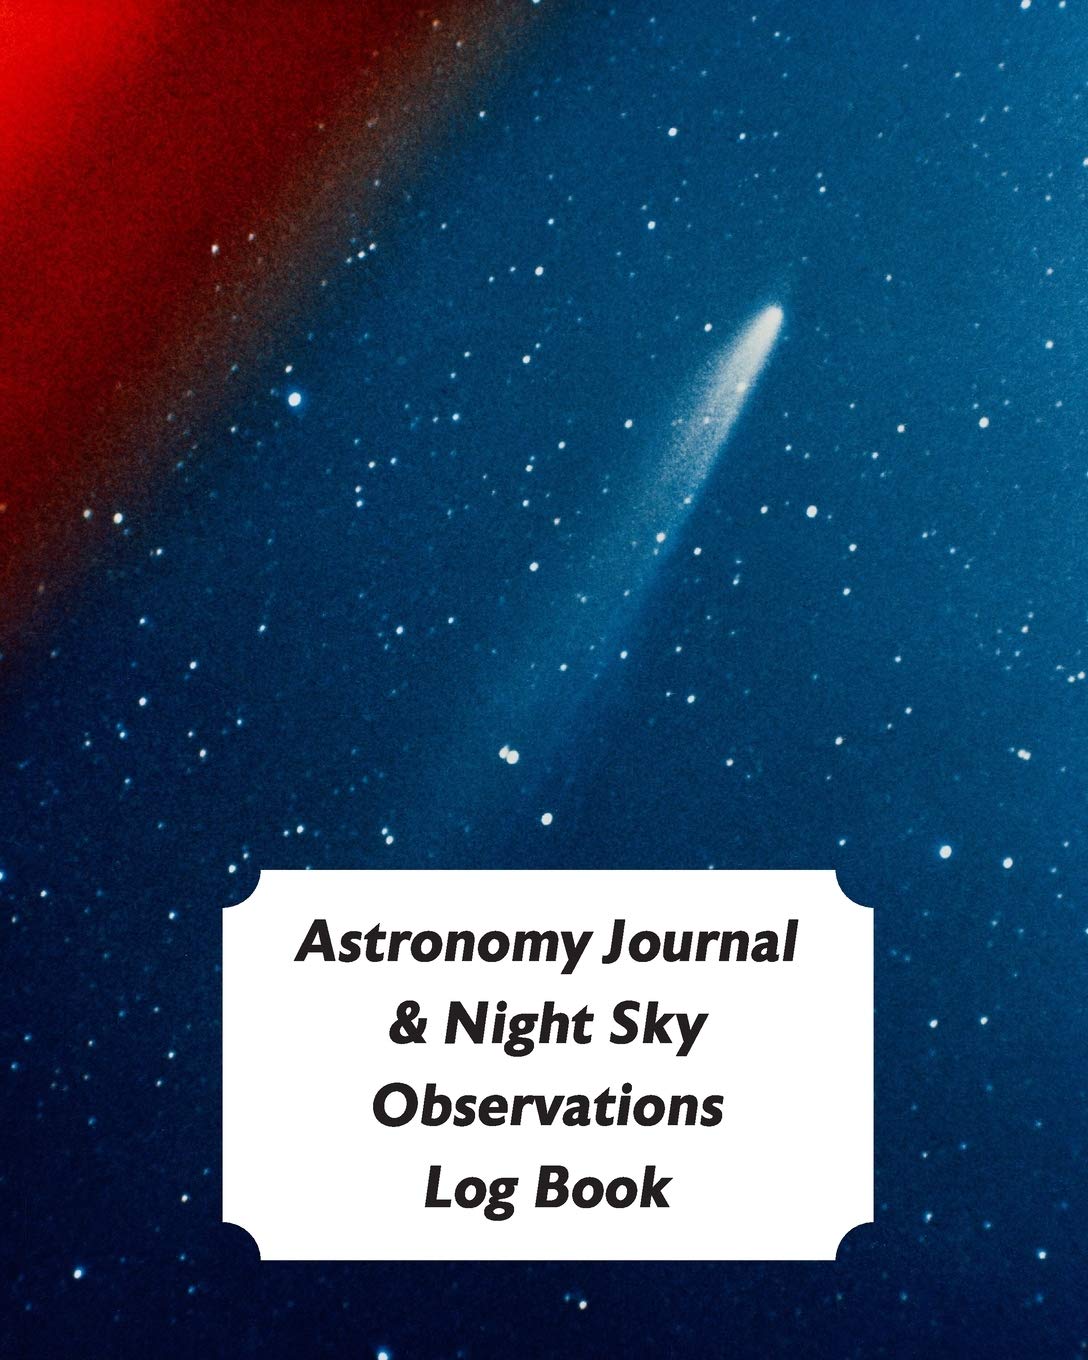 Astronomy Journal & Night Sky Observations Log Book: Great Fun Gift For Astronomer, Astrologers, Sky Tellers, Physicists, Stars Gazers, Telescope Users & Space Lovers (Astronomy Log Book)